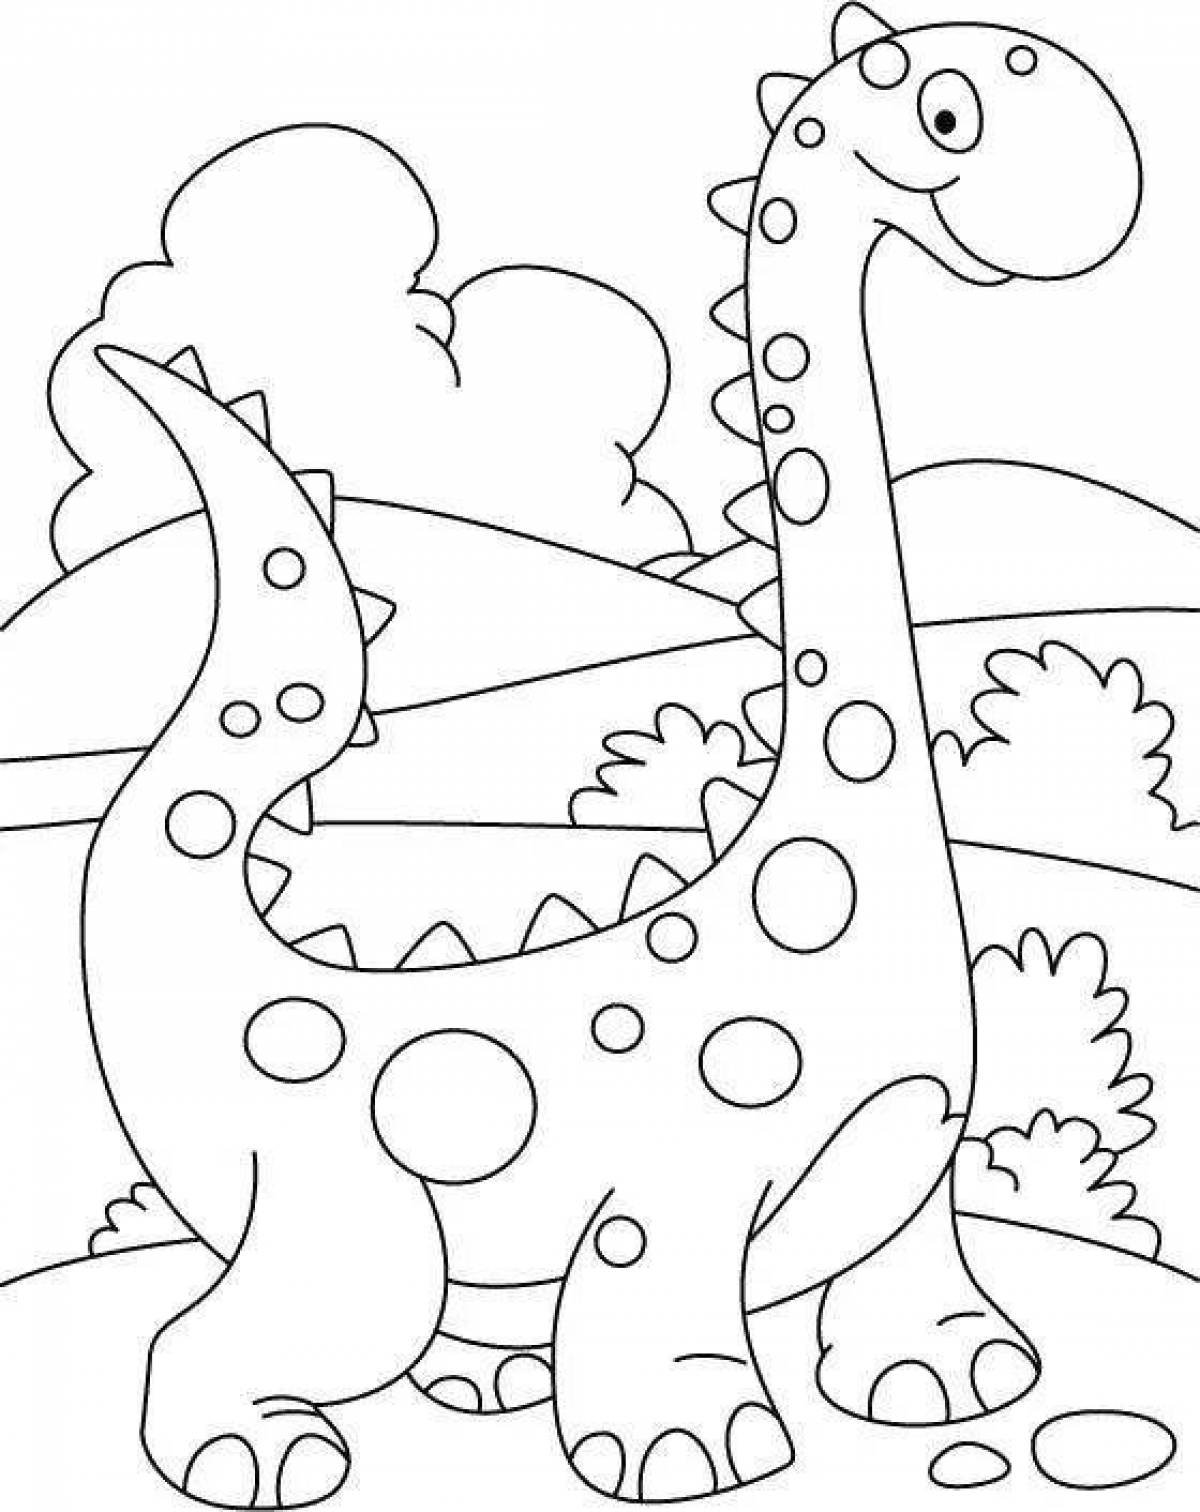 Color cute dinosaur coloring book for kids